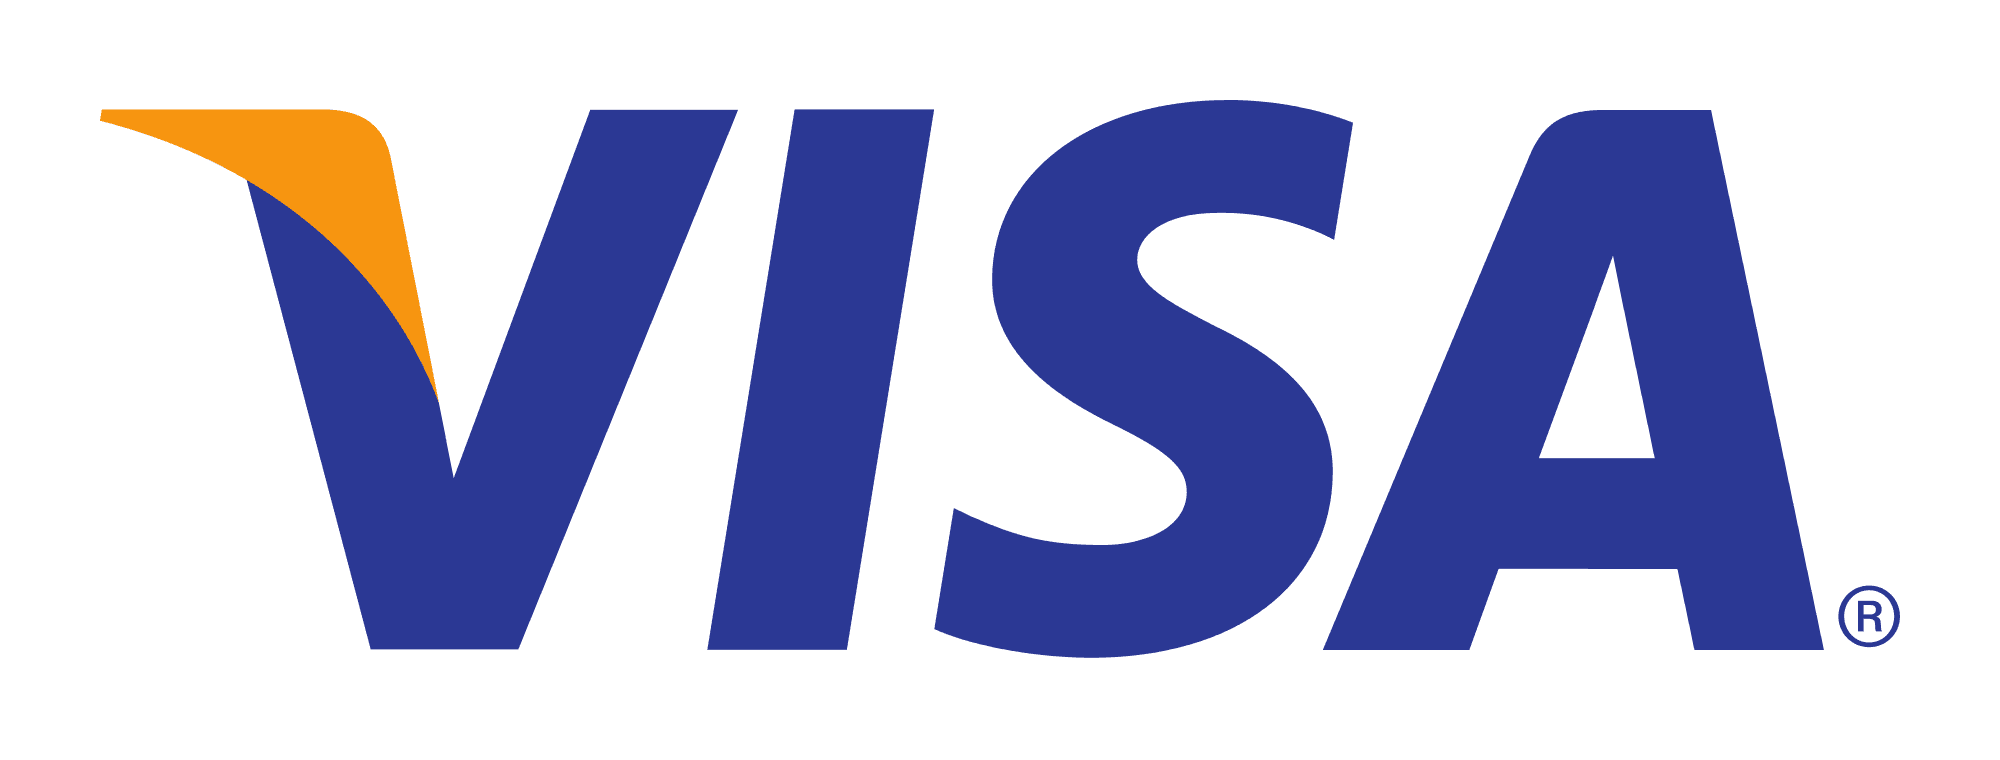 Chapman Heating and Air Conditioning accepts visa card as a payment method for all electric services in North Little Rock